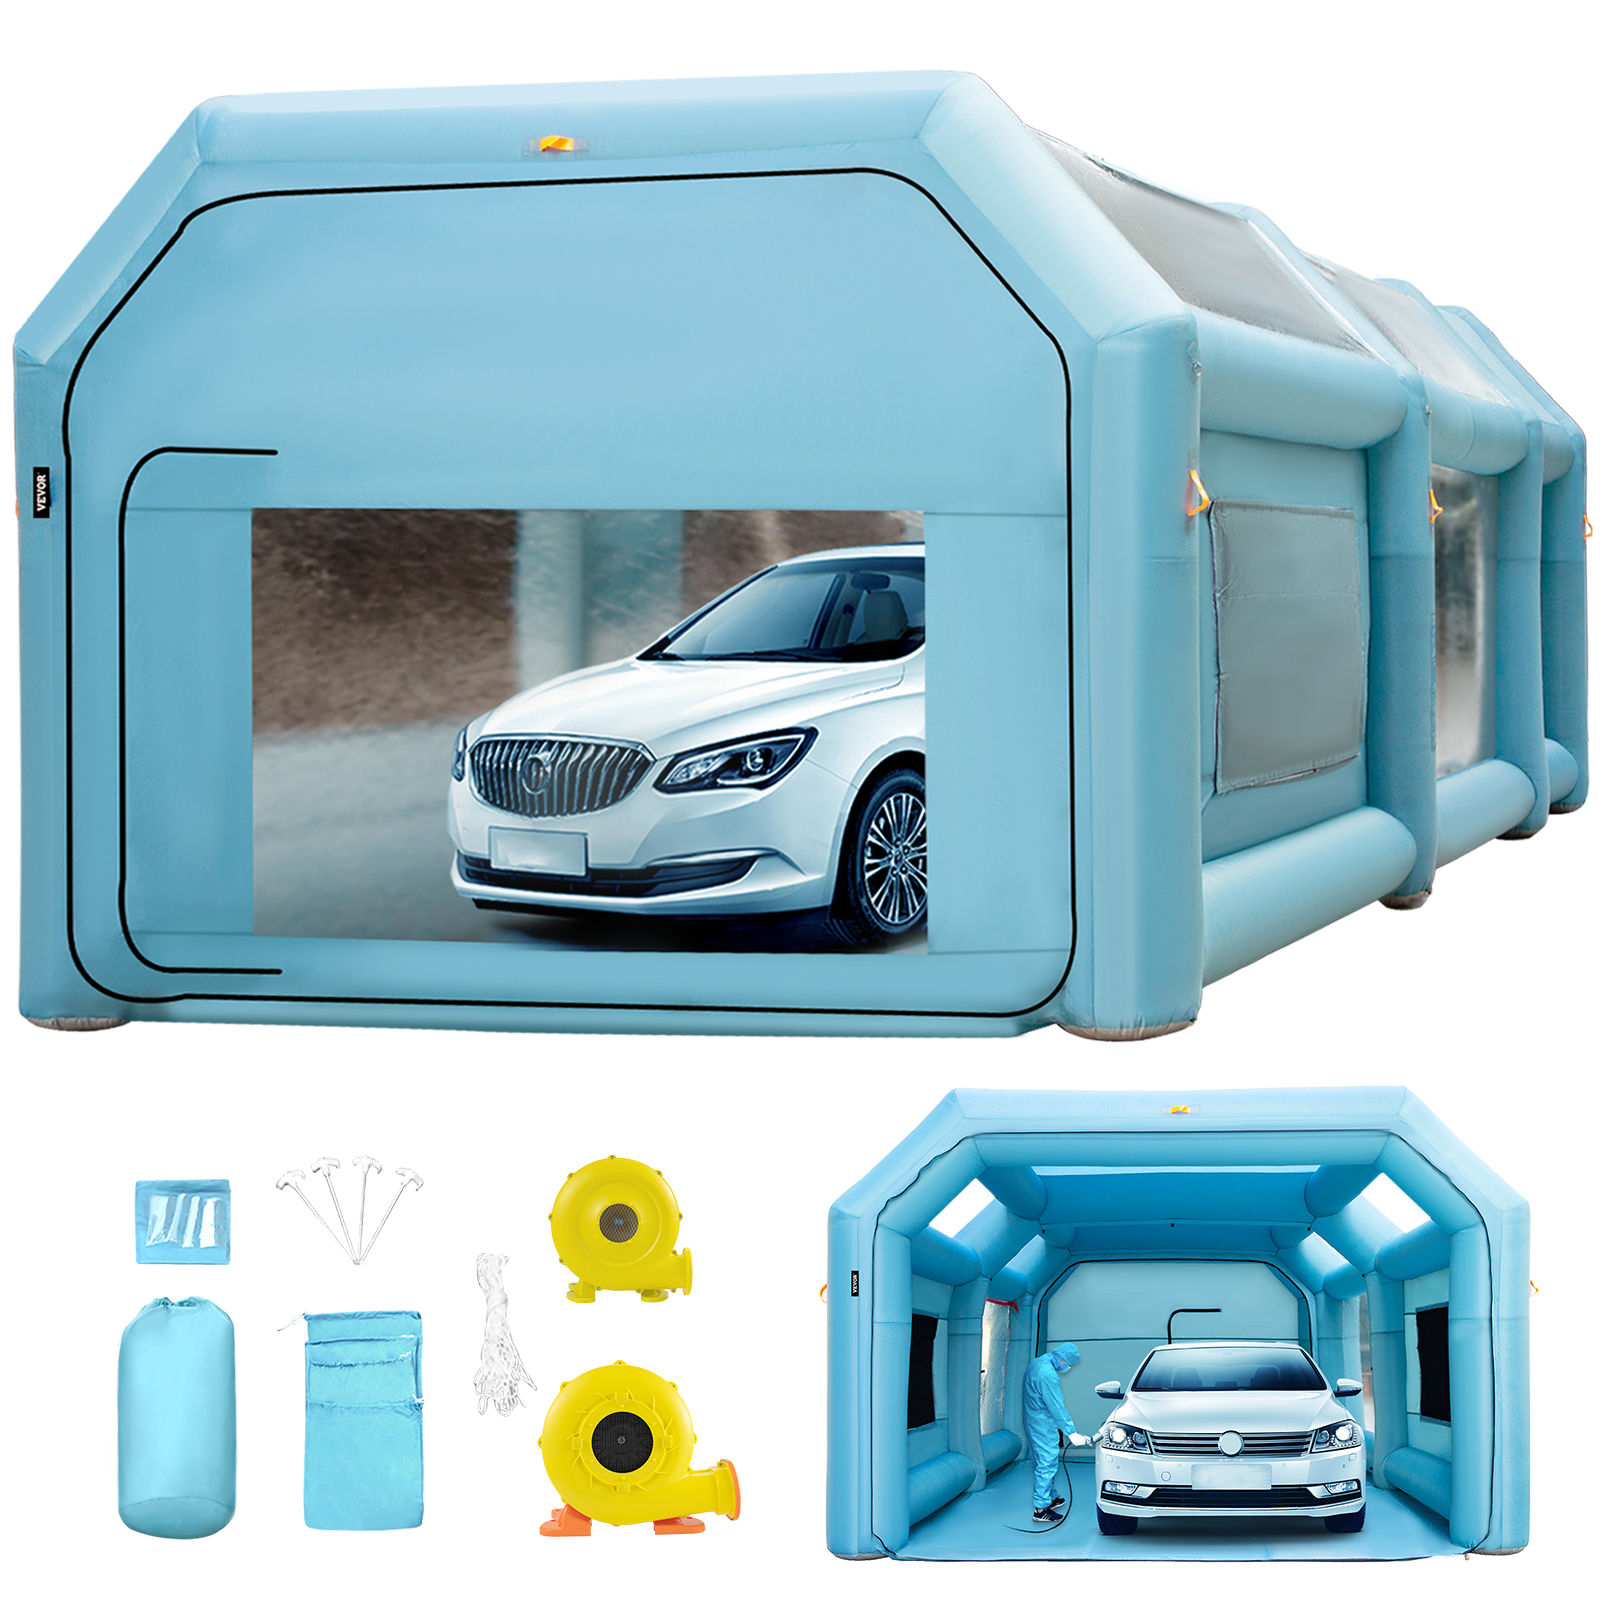 Inflatable Spray Booth Paint Tent Car Paint Capacious Filter System 2 Blowers 